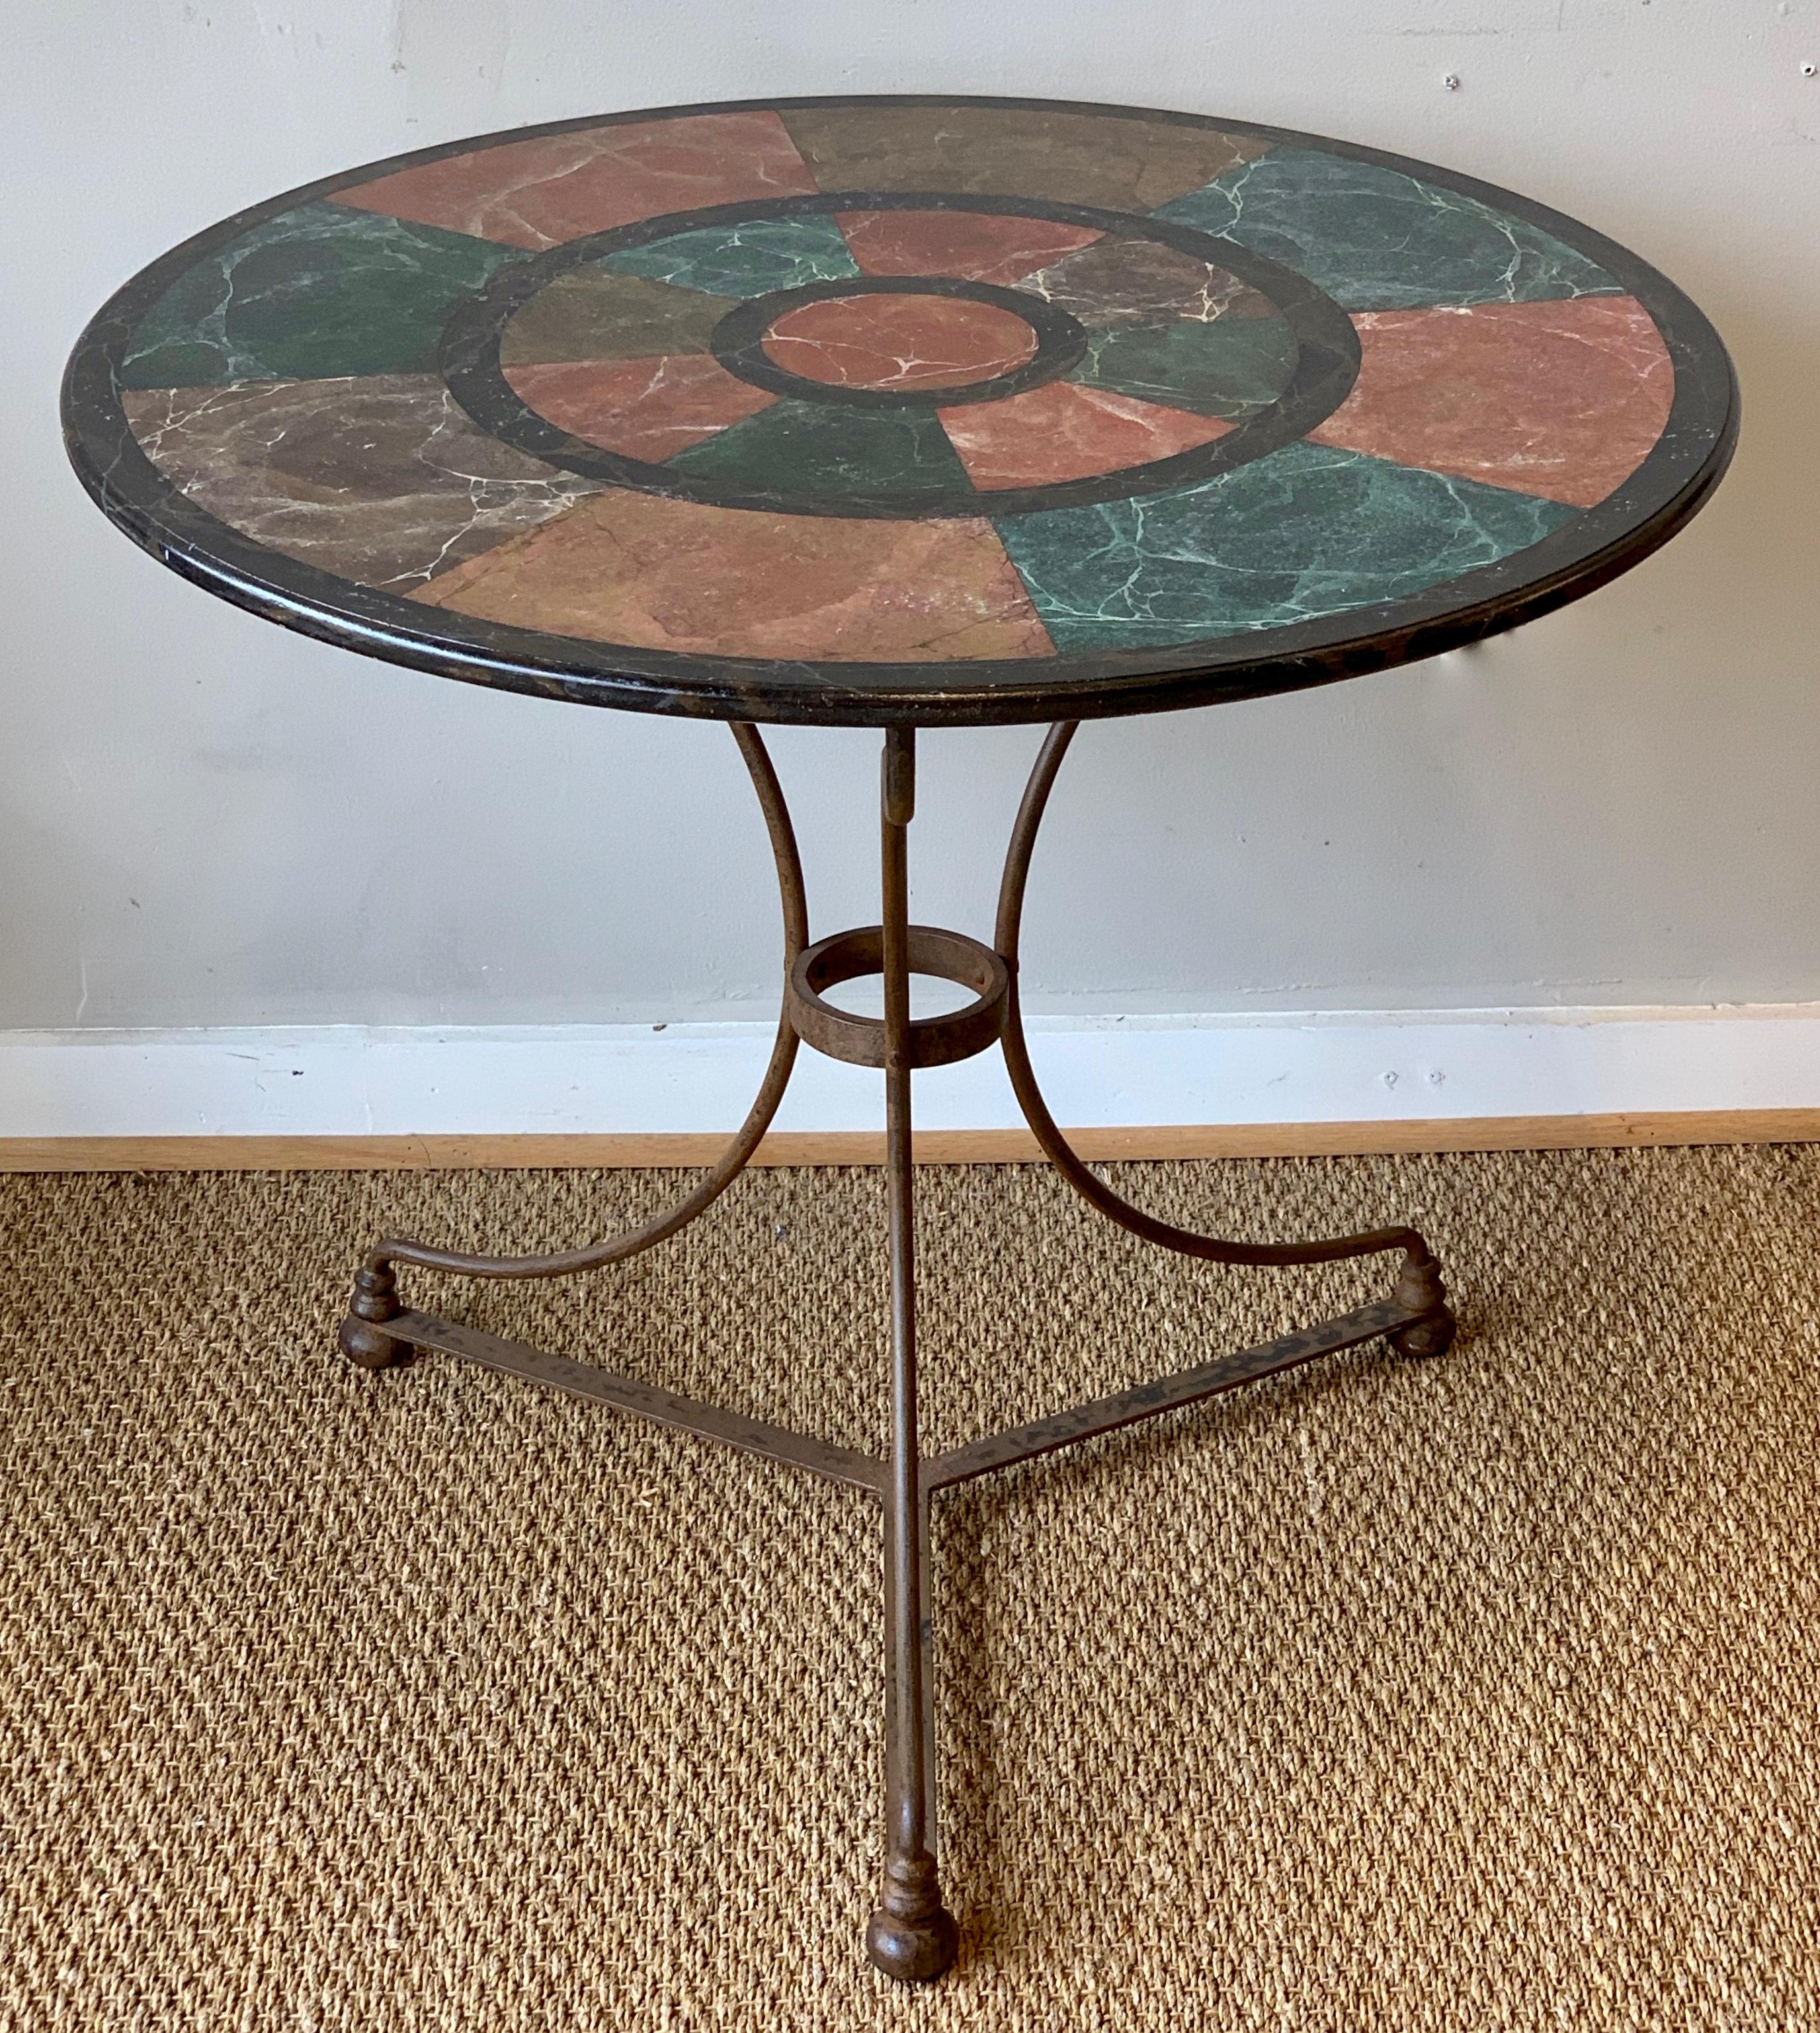 A beautifully painted faux marble-top table resting on an iron three-legged pedestal dating from the 1960s.